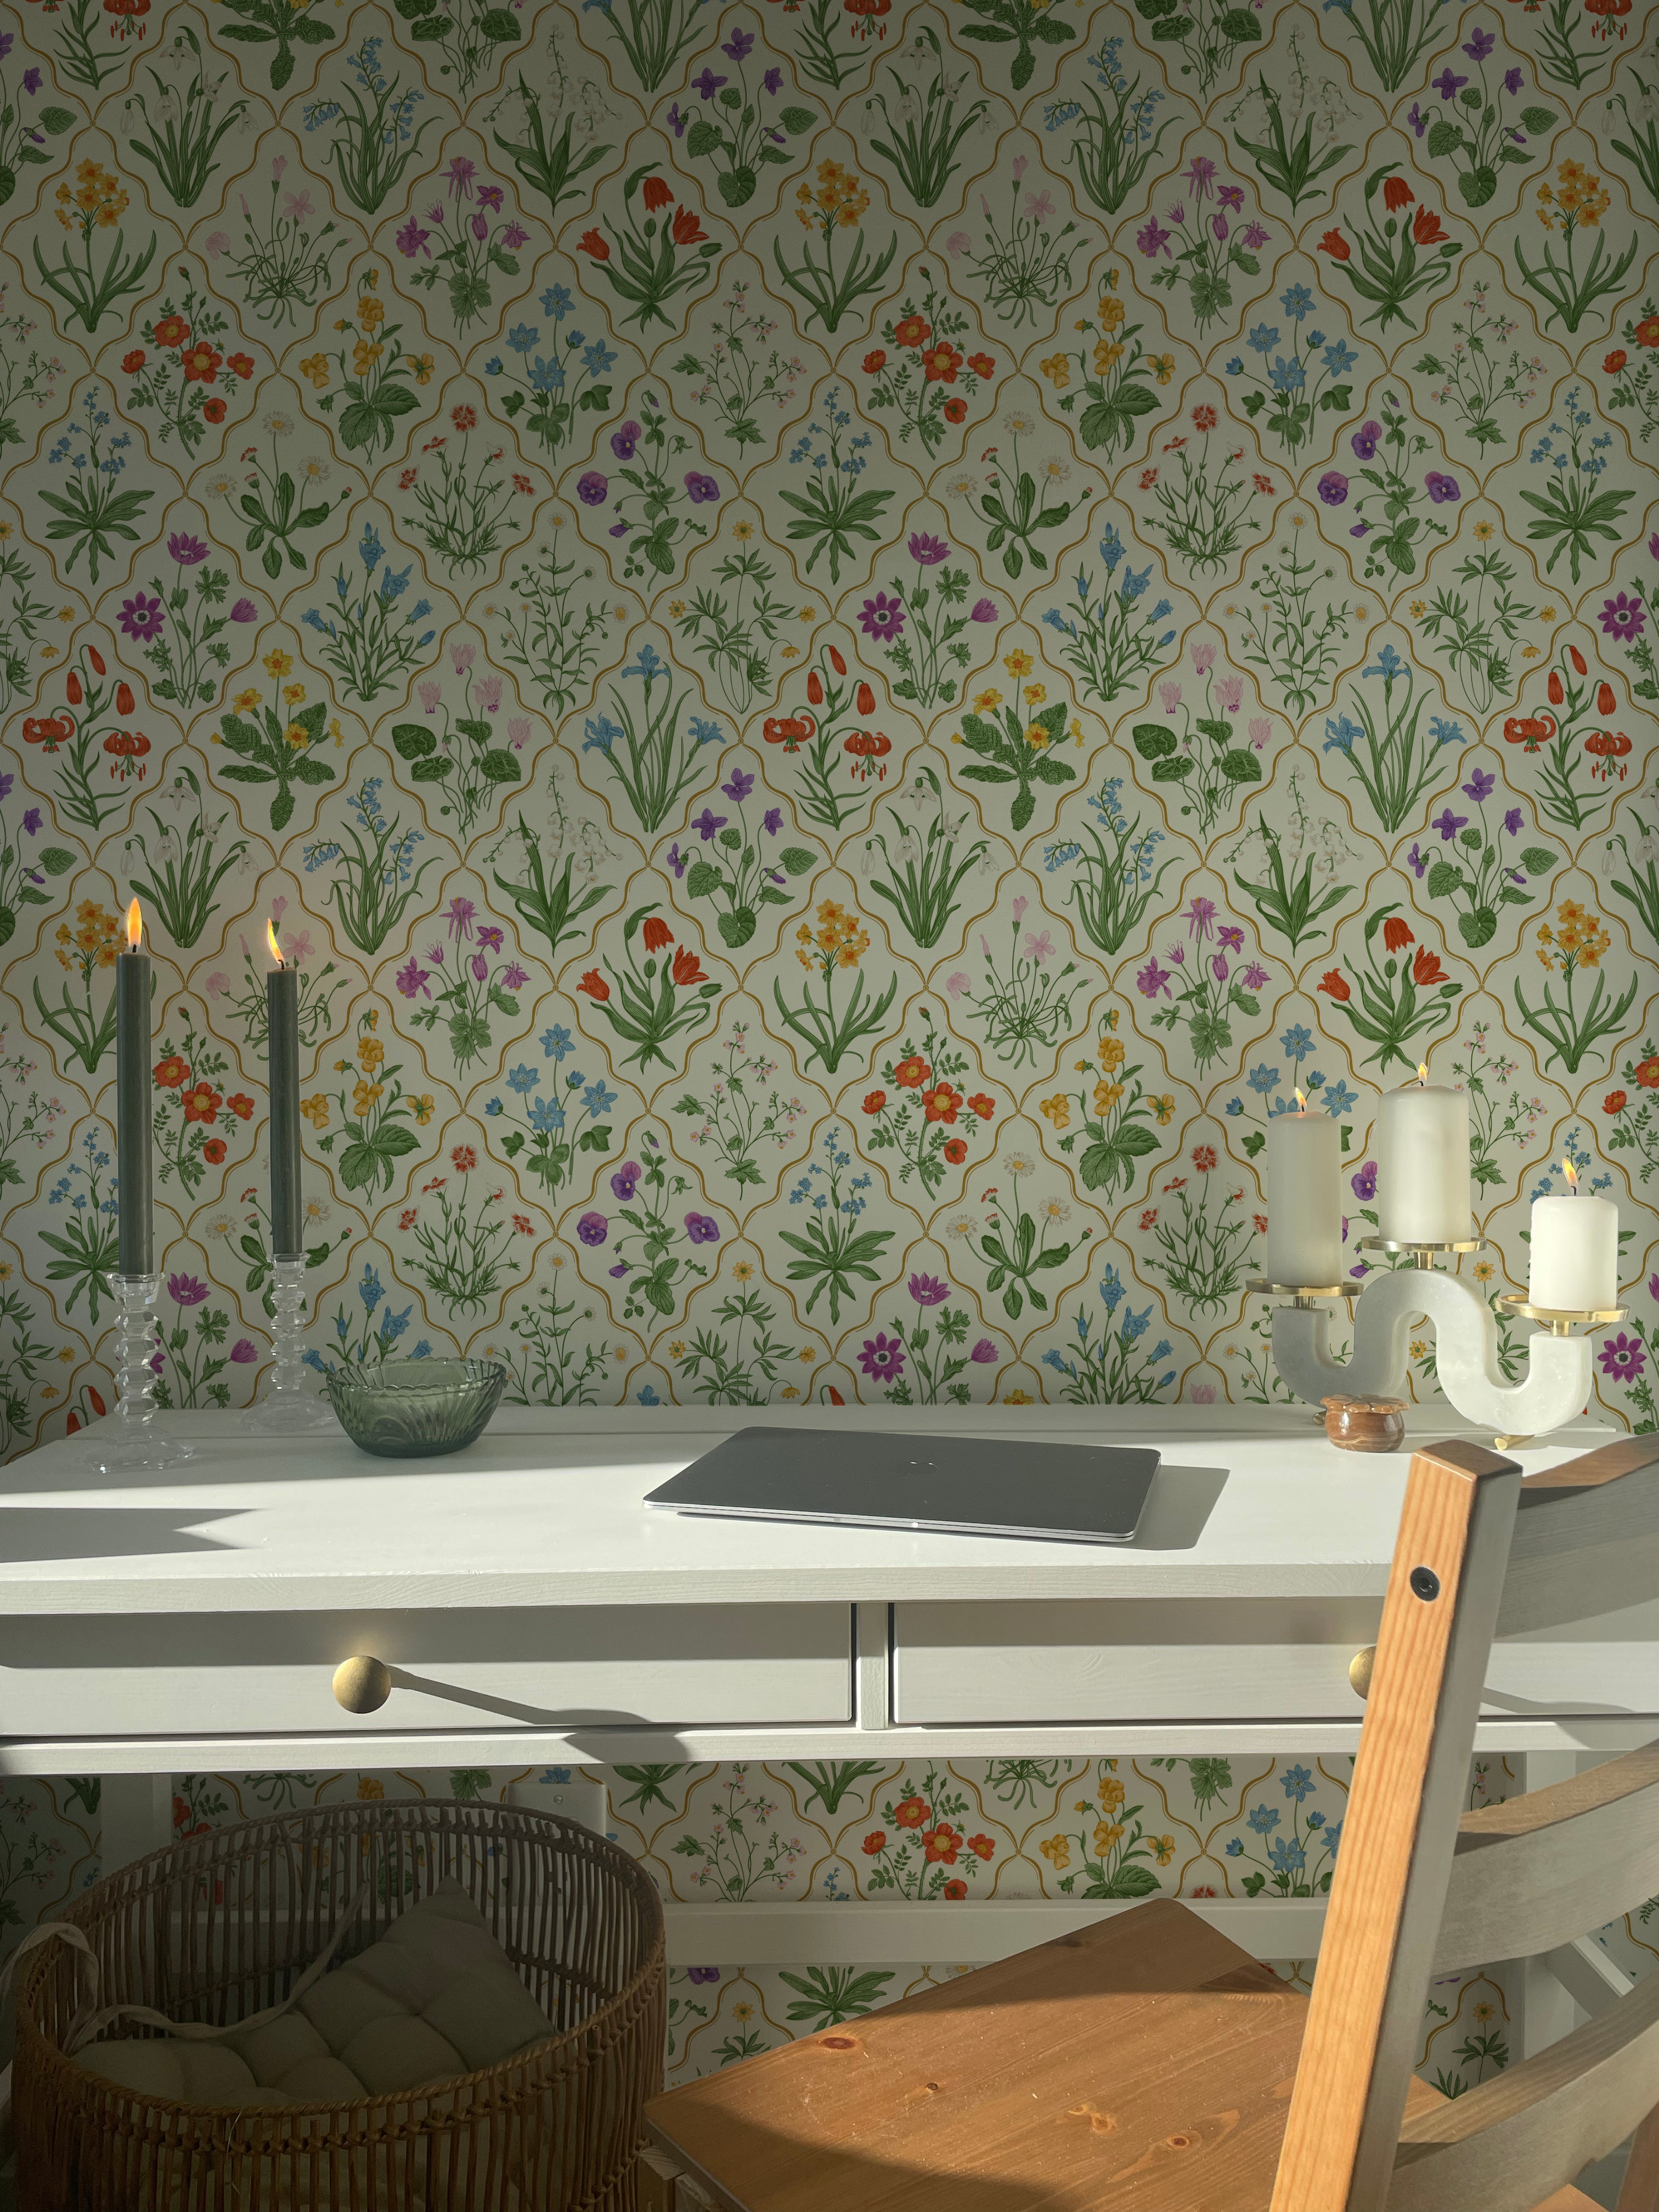 A modern kitchen setting with a wallpaper that showcases an extensive variety of garden flowers on a light background. The detailed pattern includes several species in full bloom, creating a dynamic and enchanting wall feature that enhances the natural light of the room.